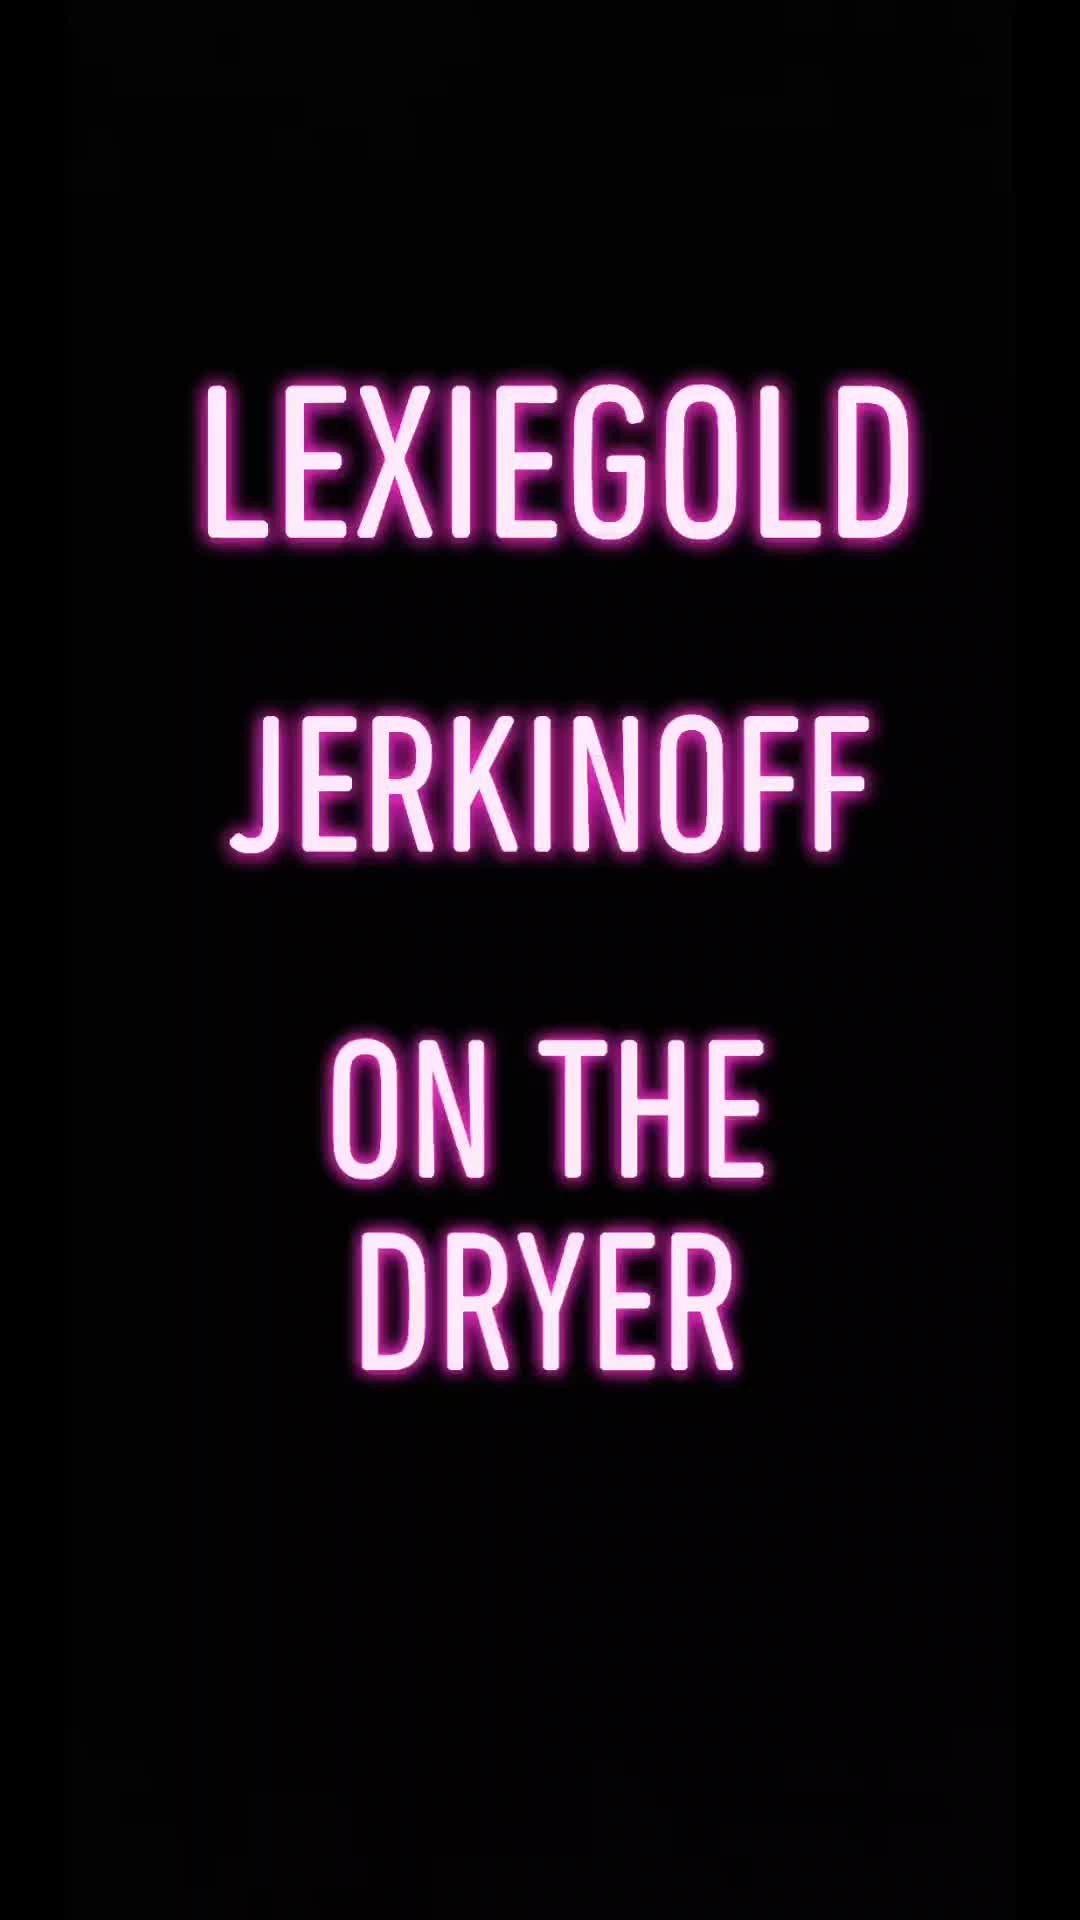 Video post by LexieGold